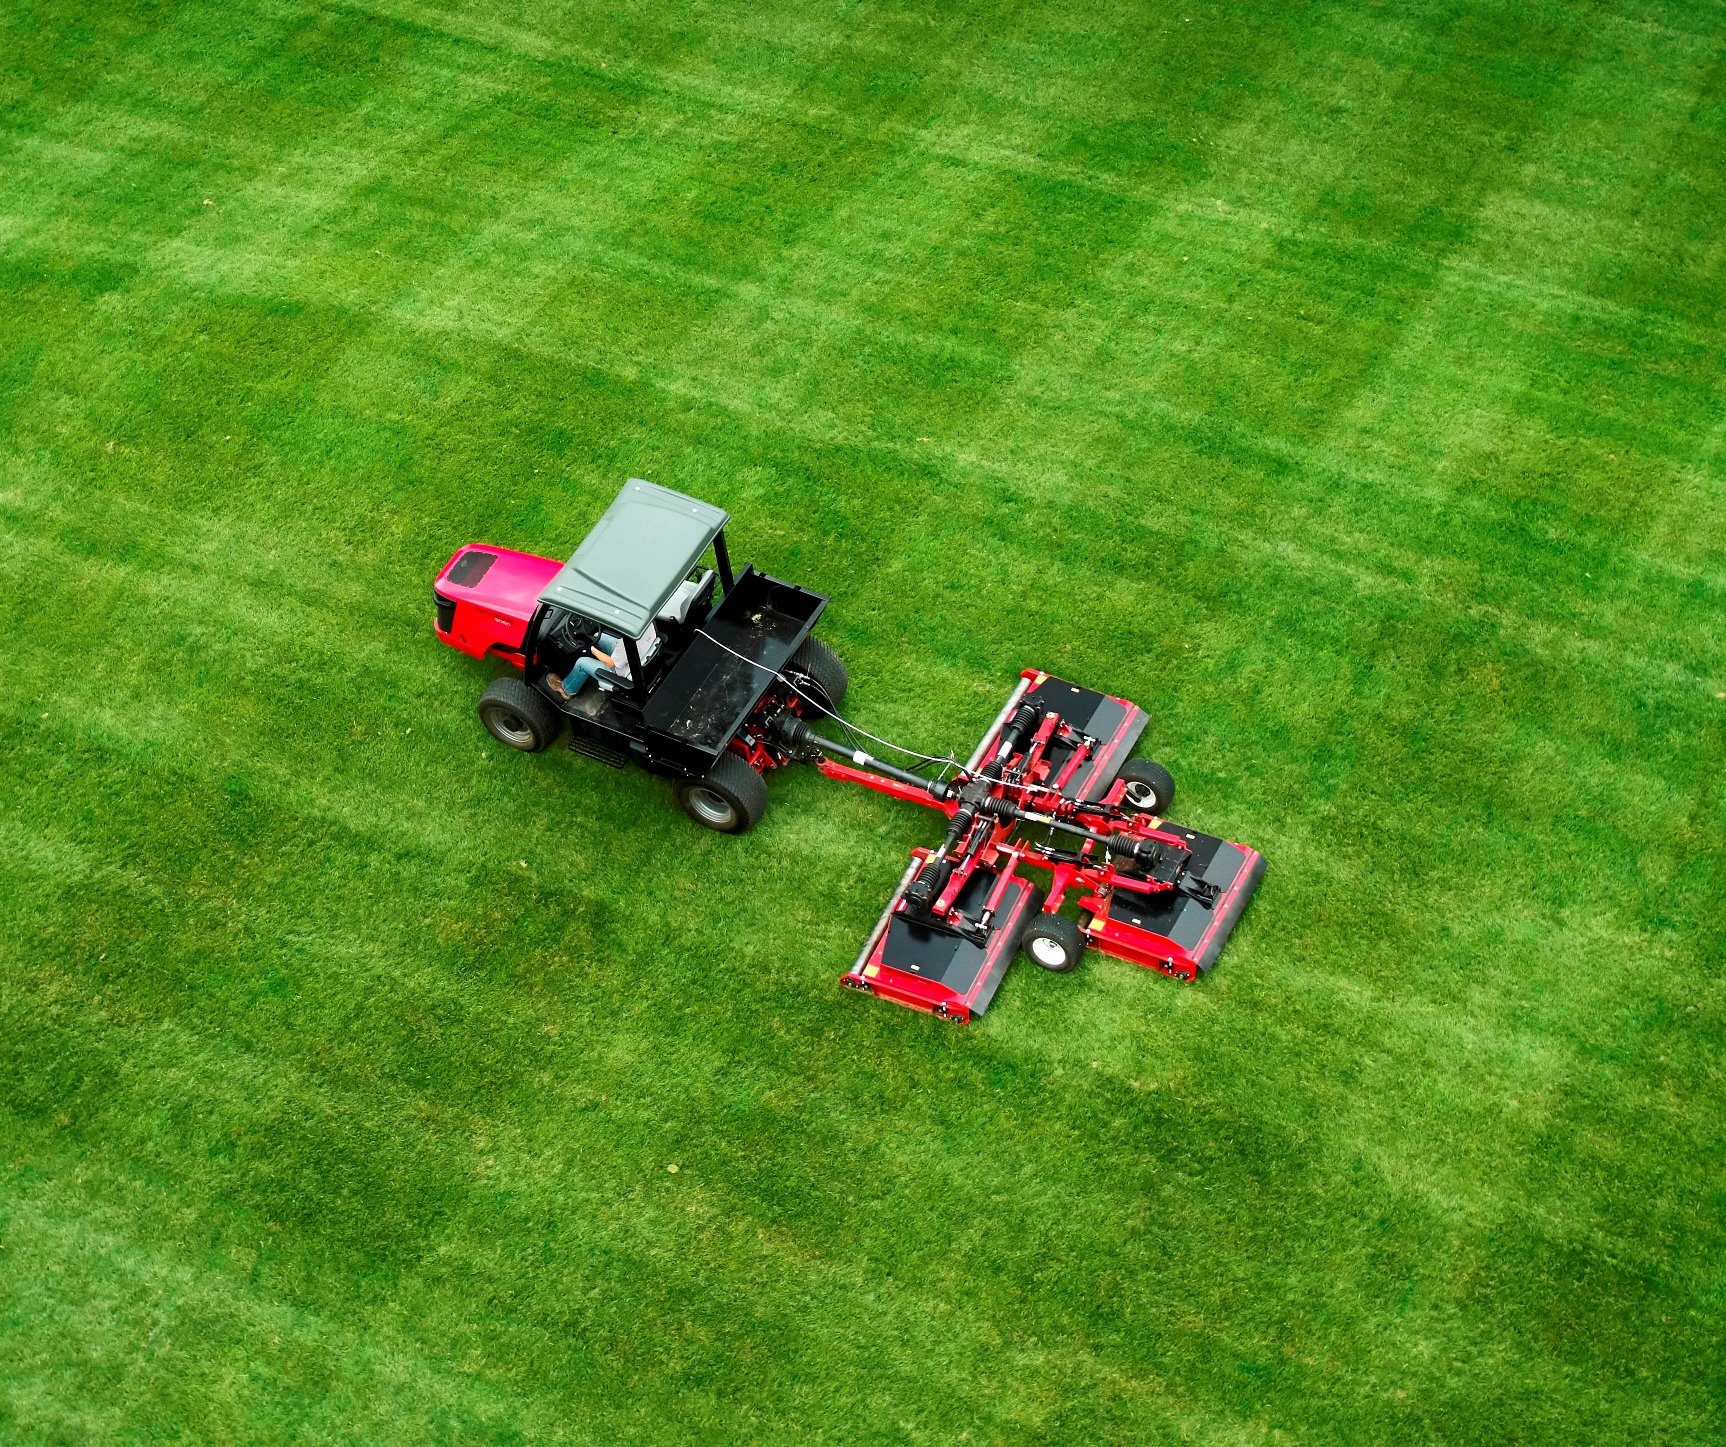 Introducing the Groundsmaster® 1200 Pull-Behind Rotary Mower